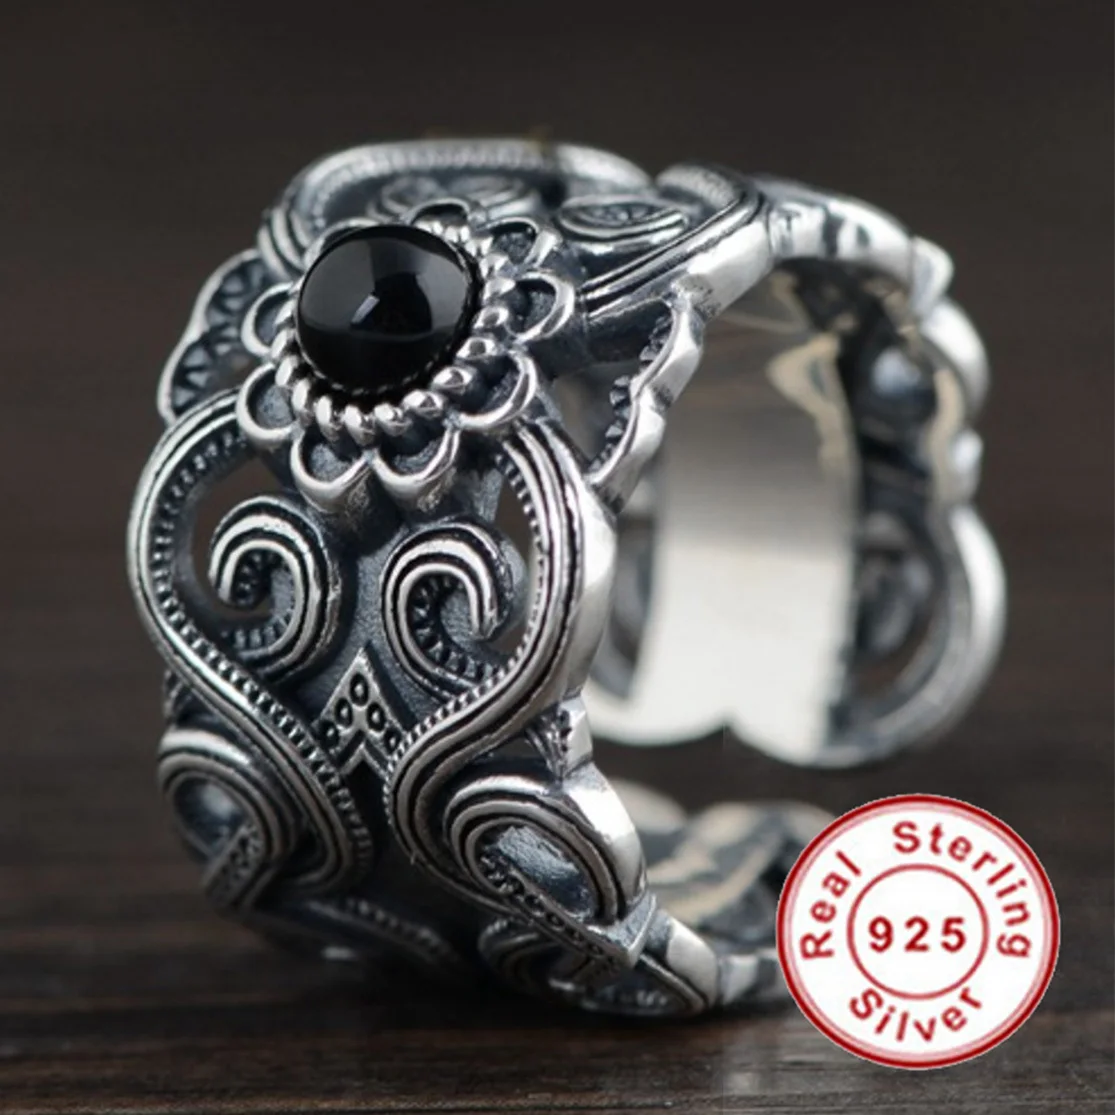 

Weight 13.2g Luxury 925 Jewelry Sterling Silver Inlaid Agate Resizable Rings For Men Women S925 Silver Flower Signet Ring Gifts